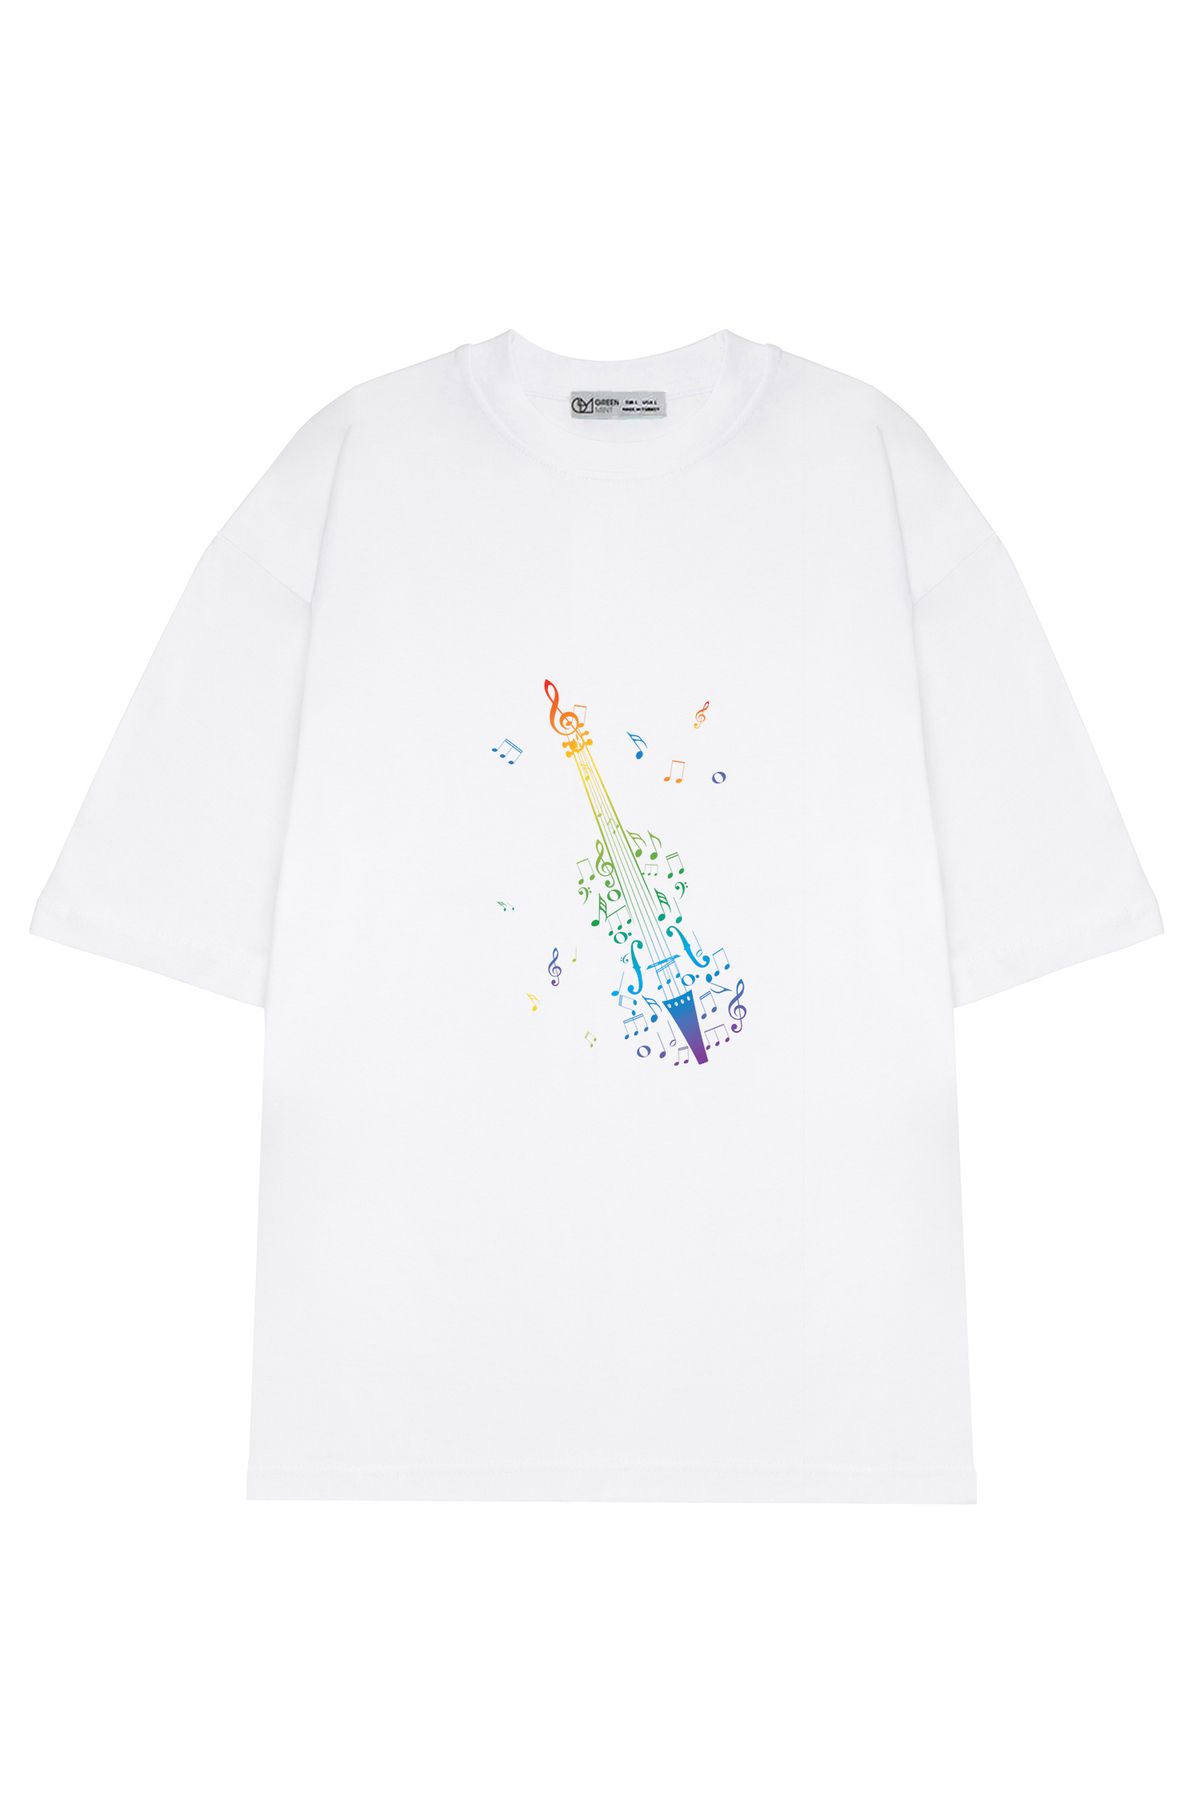 GreenMint Unisex Oversize Rainbow silhouette of violin with music notes_OE1744